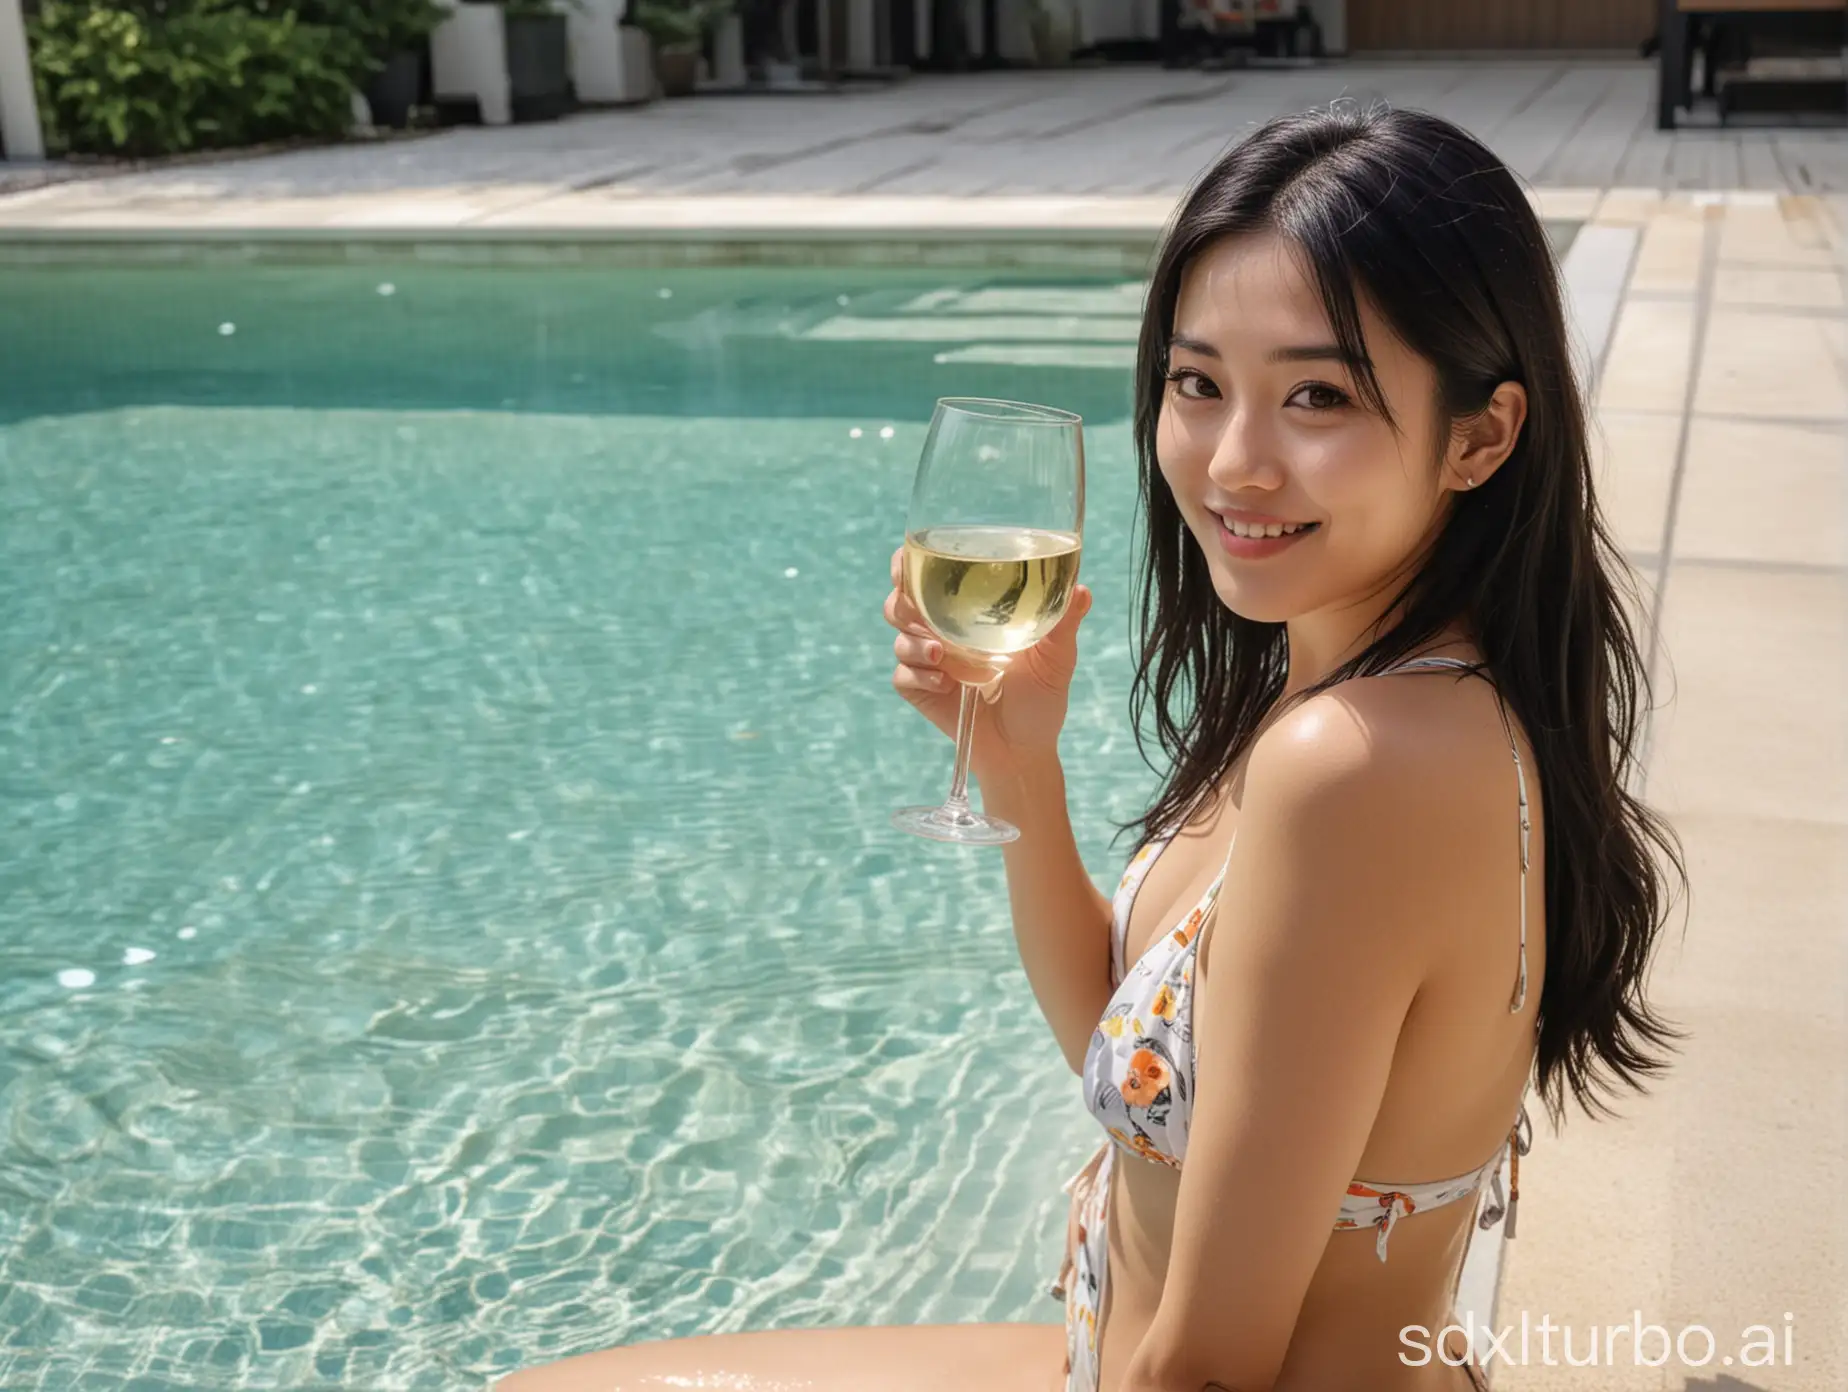 beautiful intellectual typical Japanese 33-year-old girl sits beside swimming pool with ONE glass of white wine, smiling, Bikini, Instagram model, long black hair, warm, black eyes, height 6.5 feets, female, masterpiece, 4k, correct fingers or hands